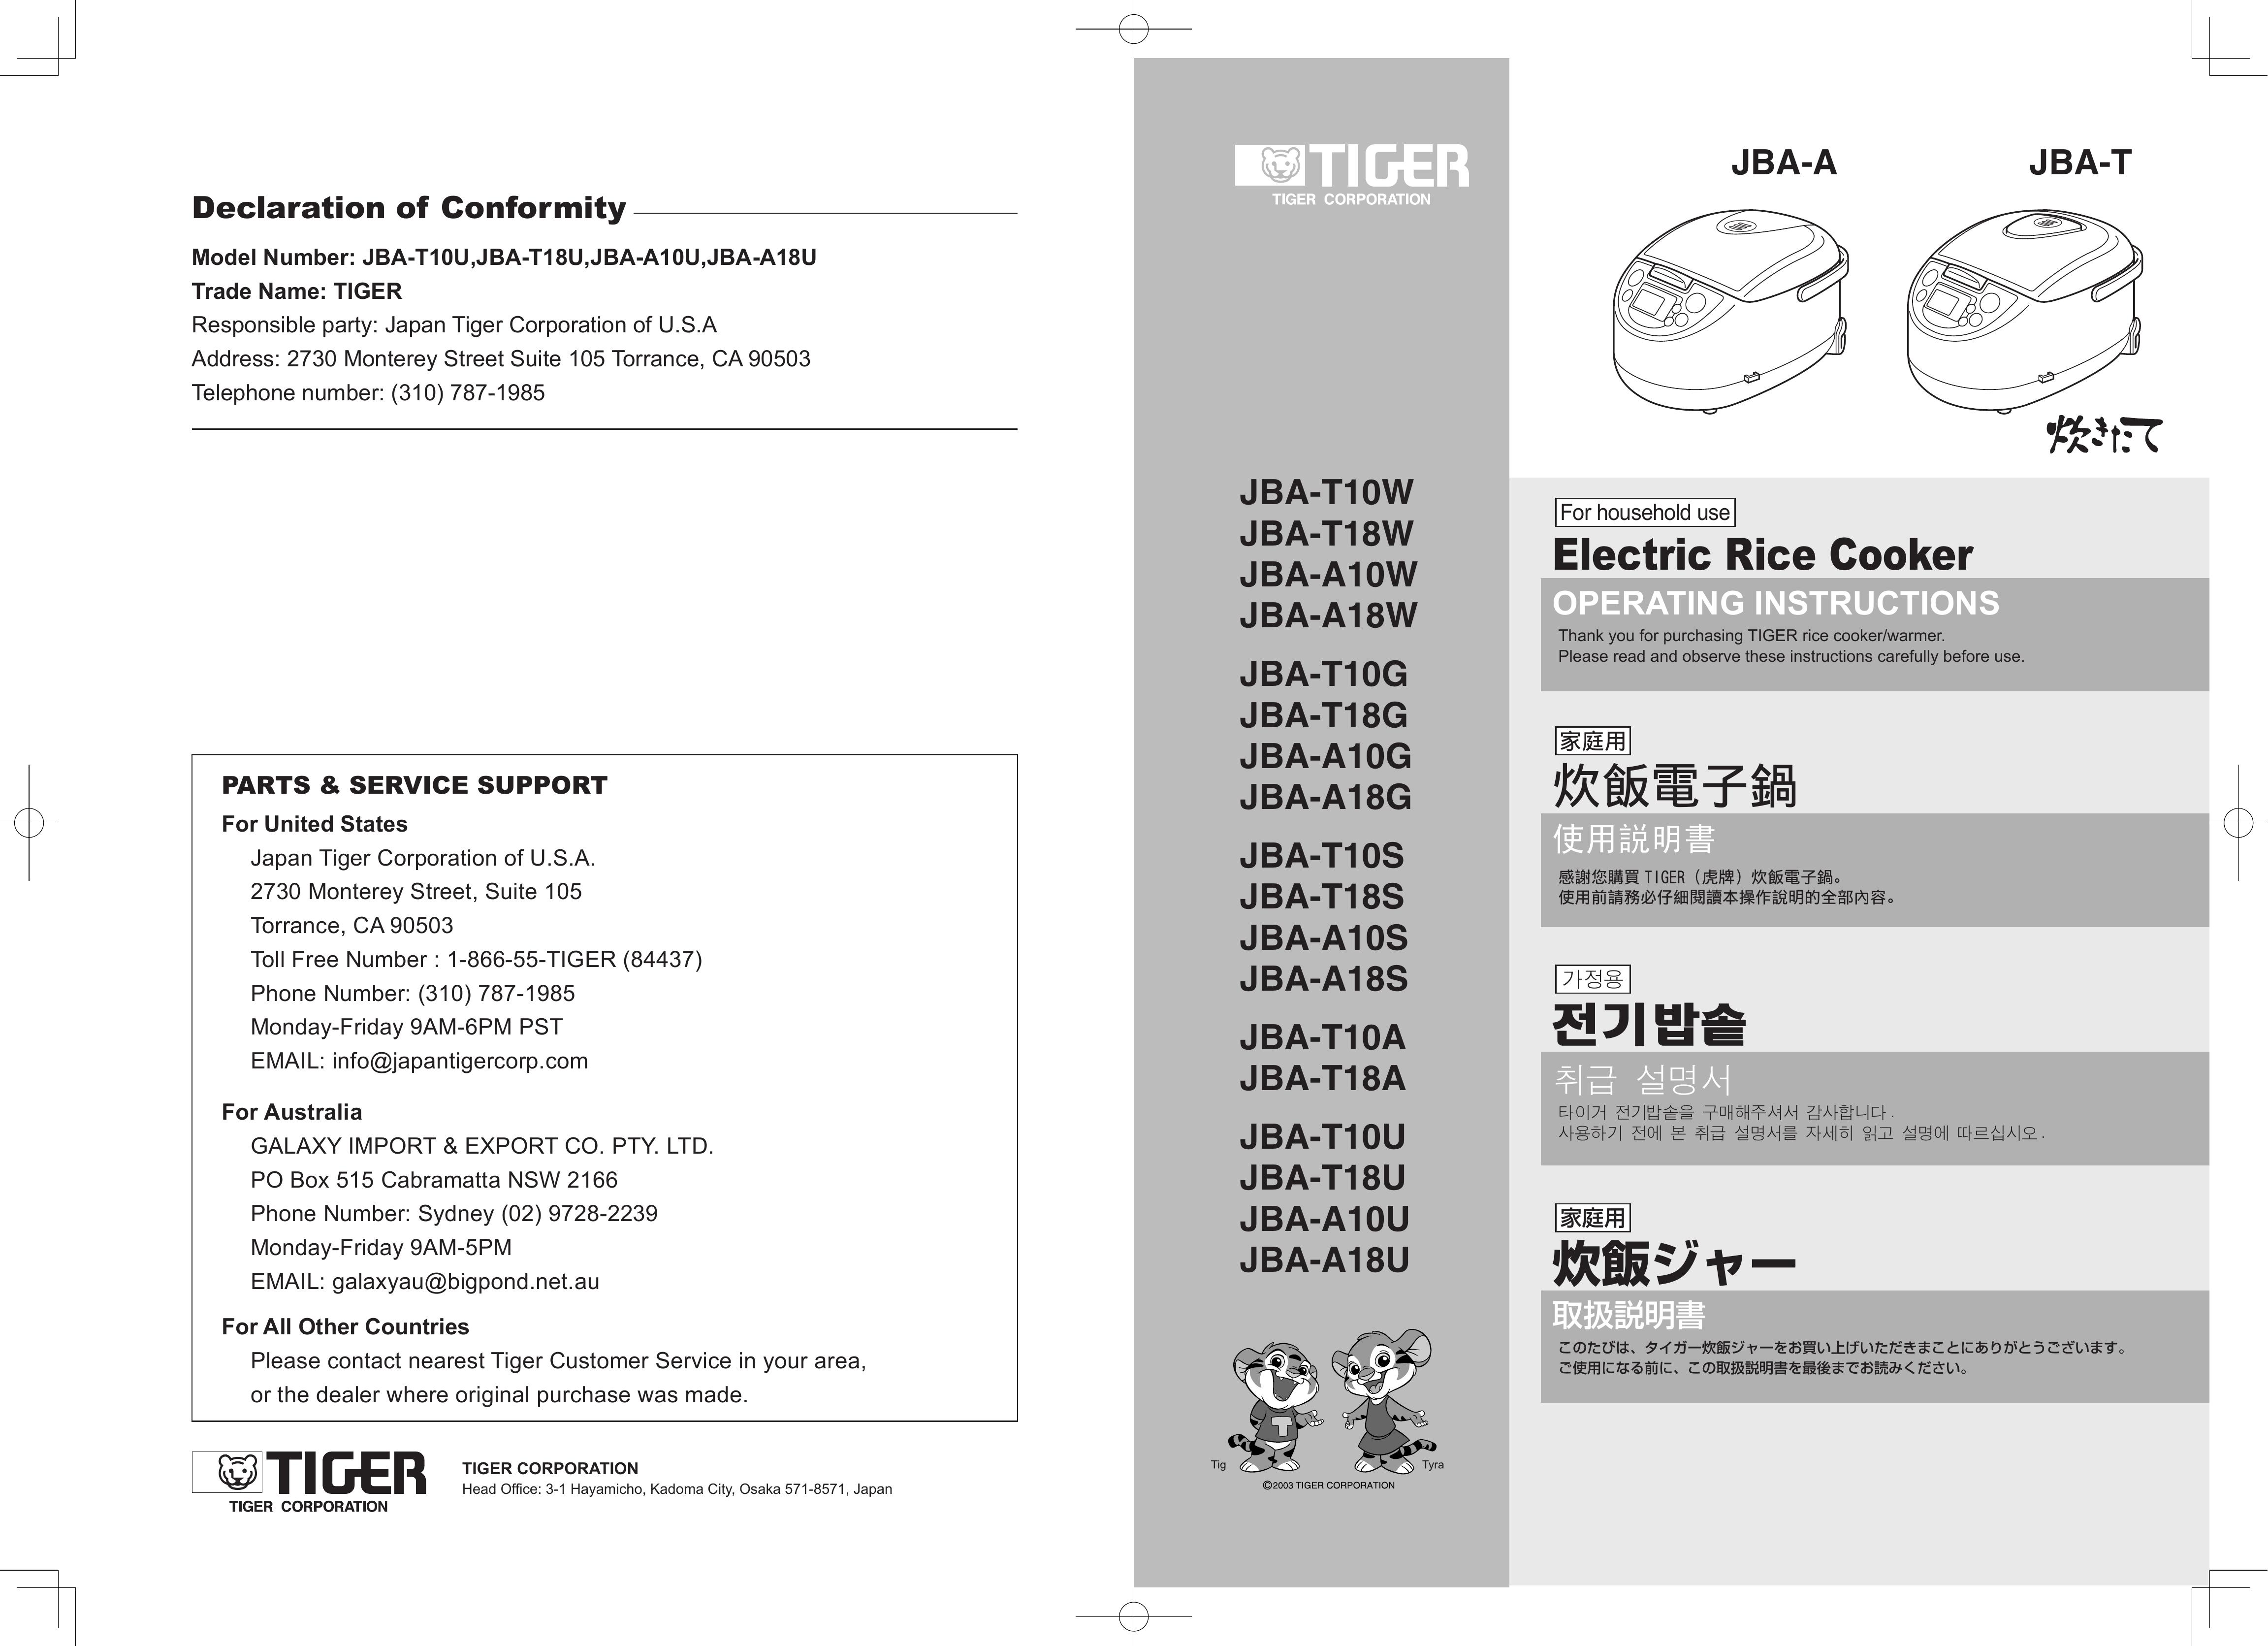 Tiger Products Co., Ltd JBA-A10S Rice Cooker User Manual